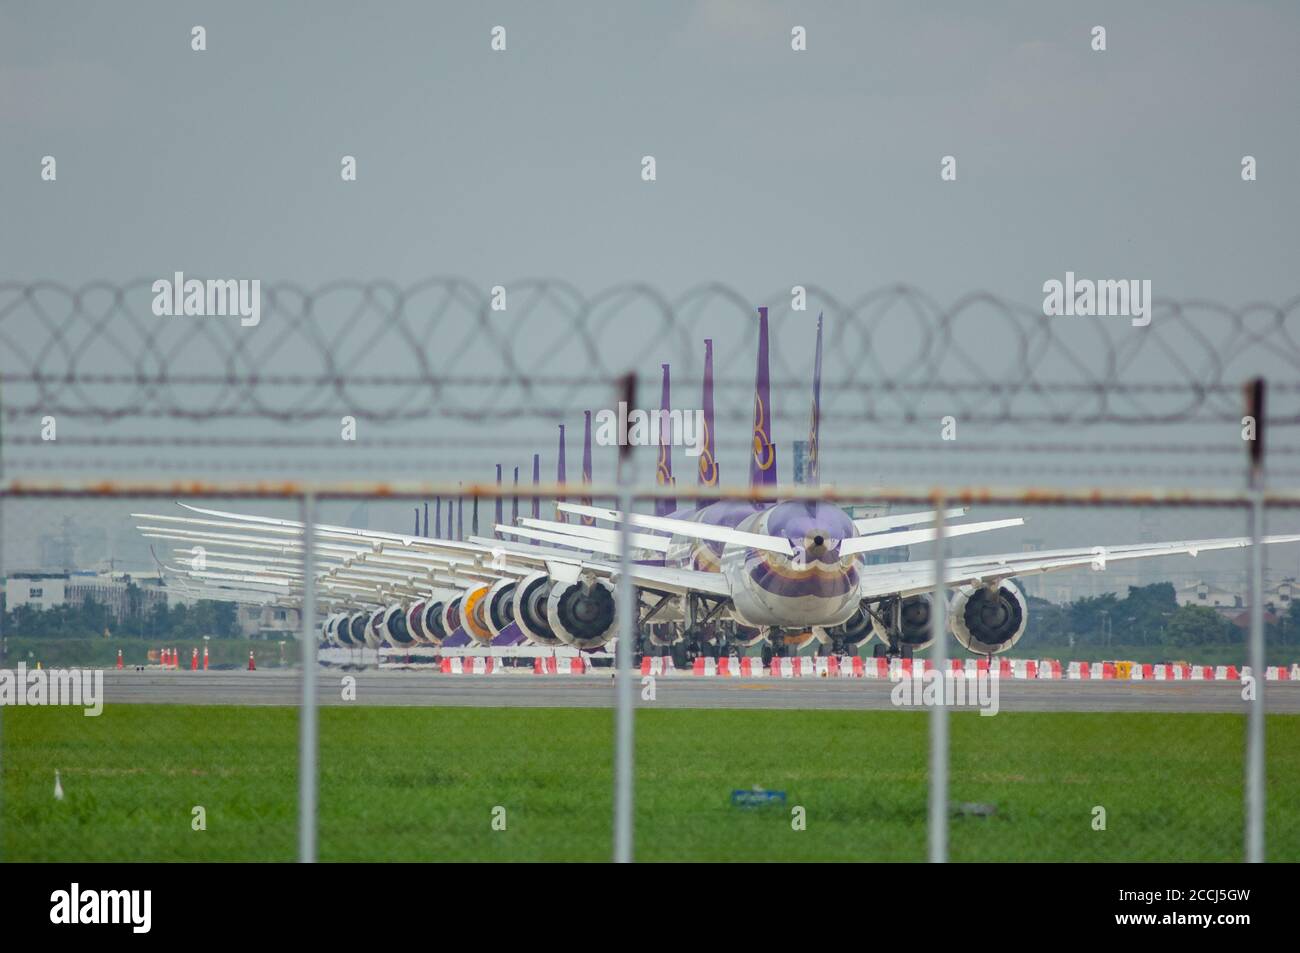 Bangkok, Thailand - August 23, 2020: Widebody airplanes belonging to the bankrupt Thai Airways being stored at Suvarnabhumi Airport during the Covid-1 Stock Photo